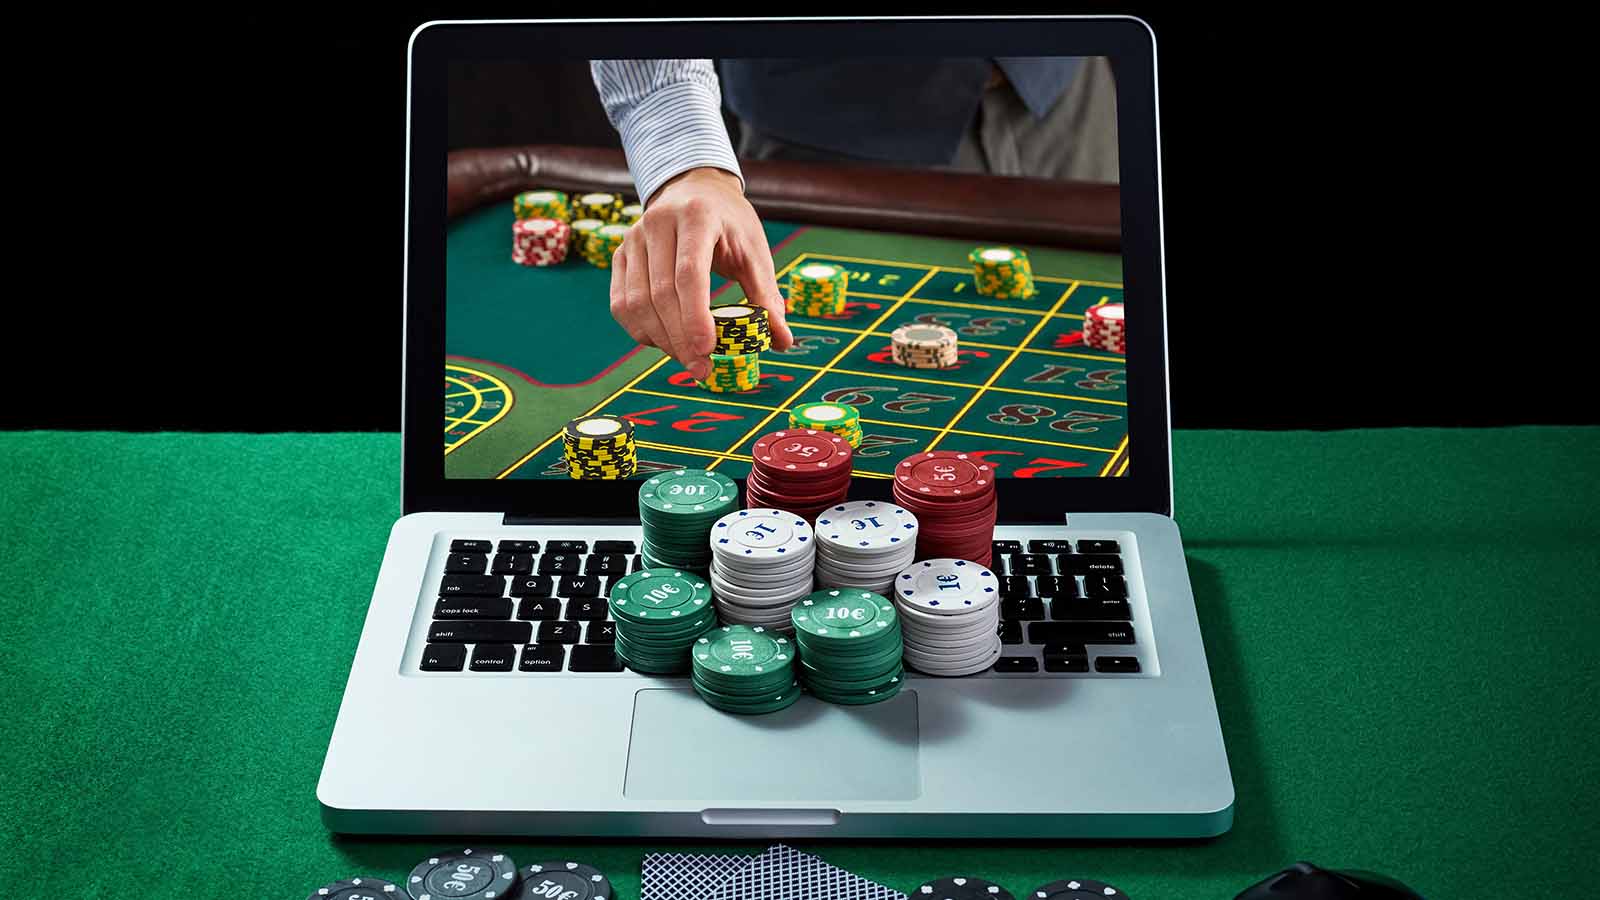 Why Are The Chances of Winning Better at Online Casinos